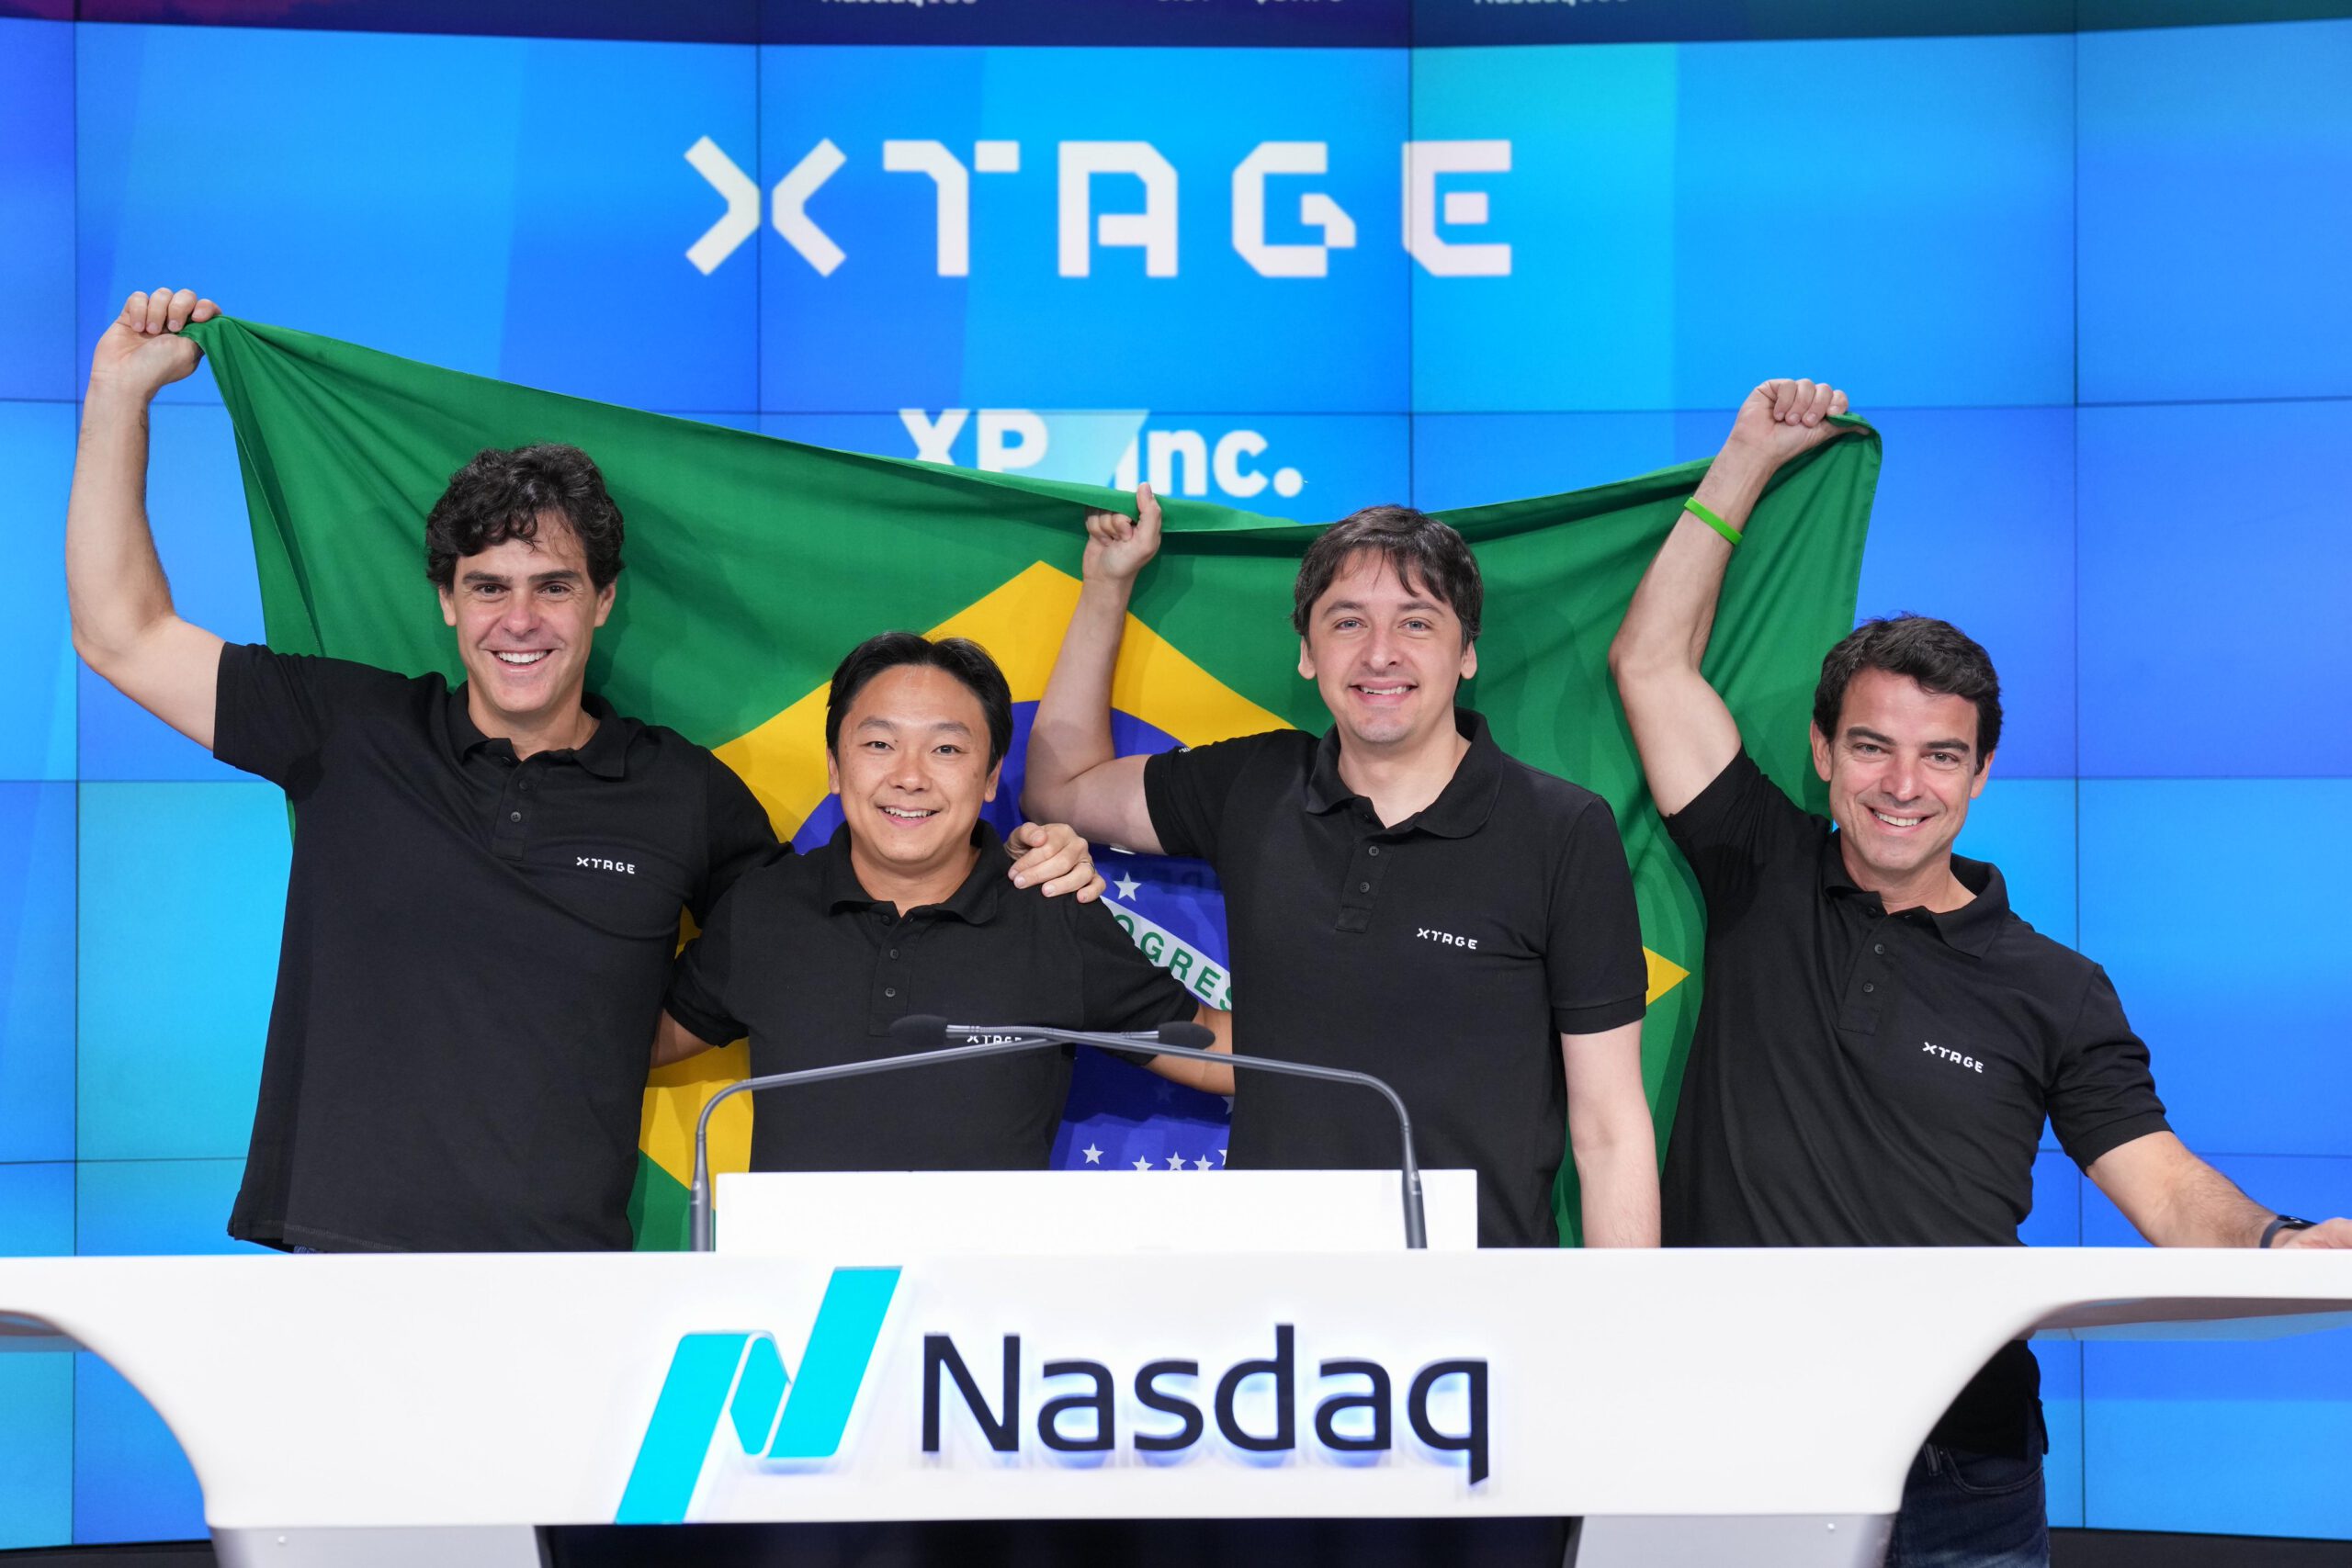 The largest Brazilian brokerage firm XP Inc. Launch of the Bitcoin and Ethereum trading service